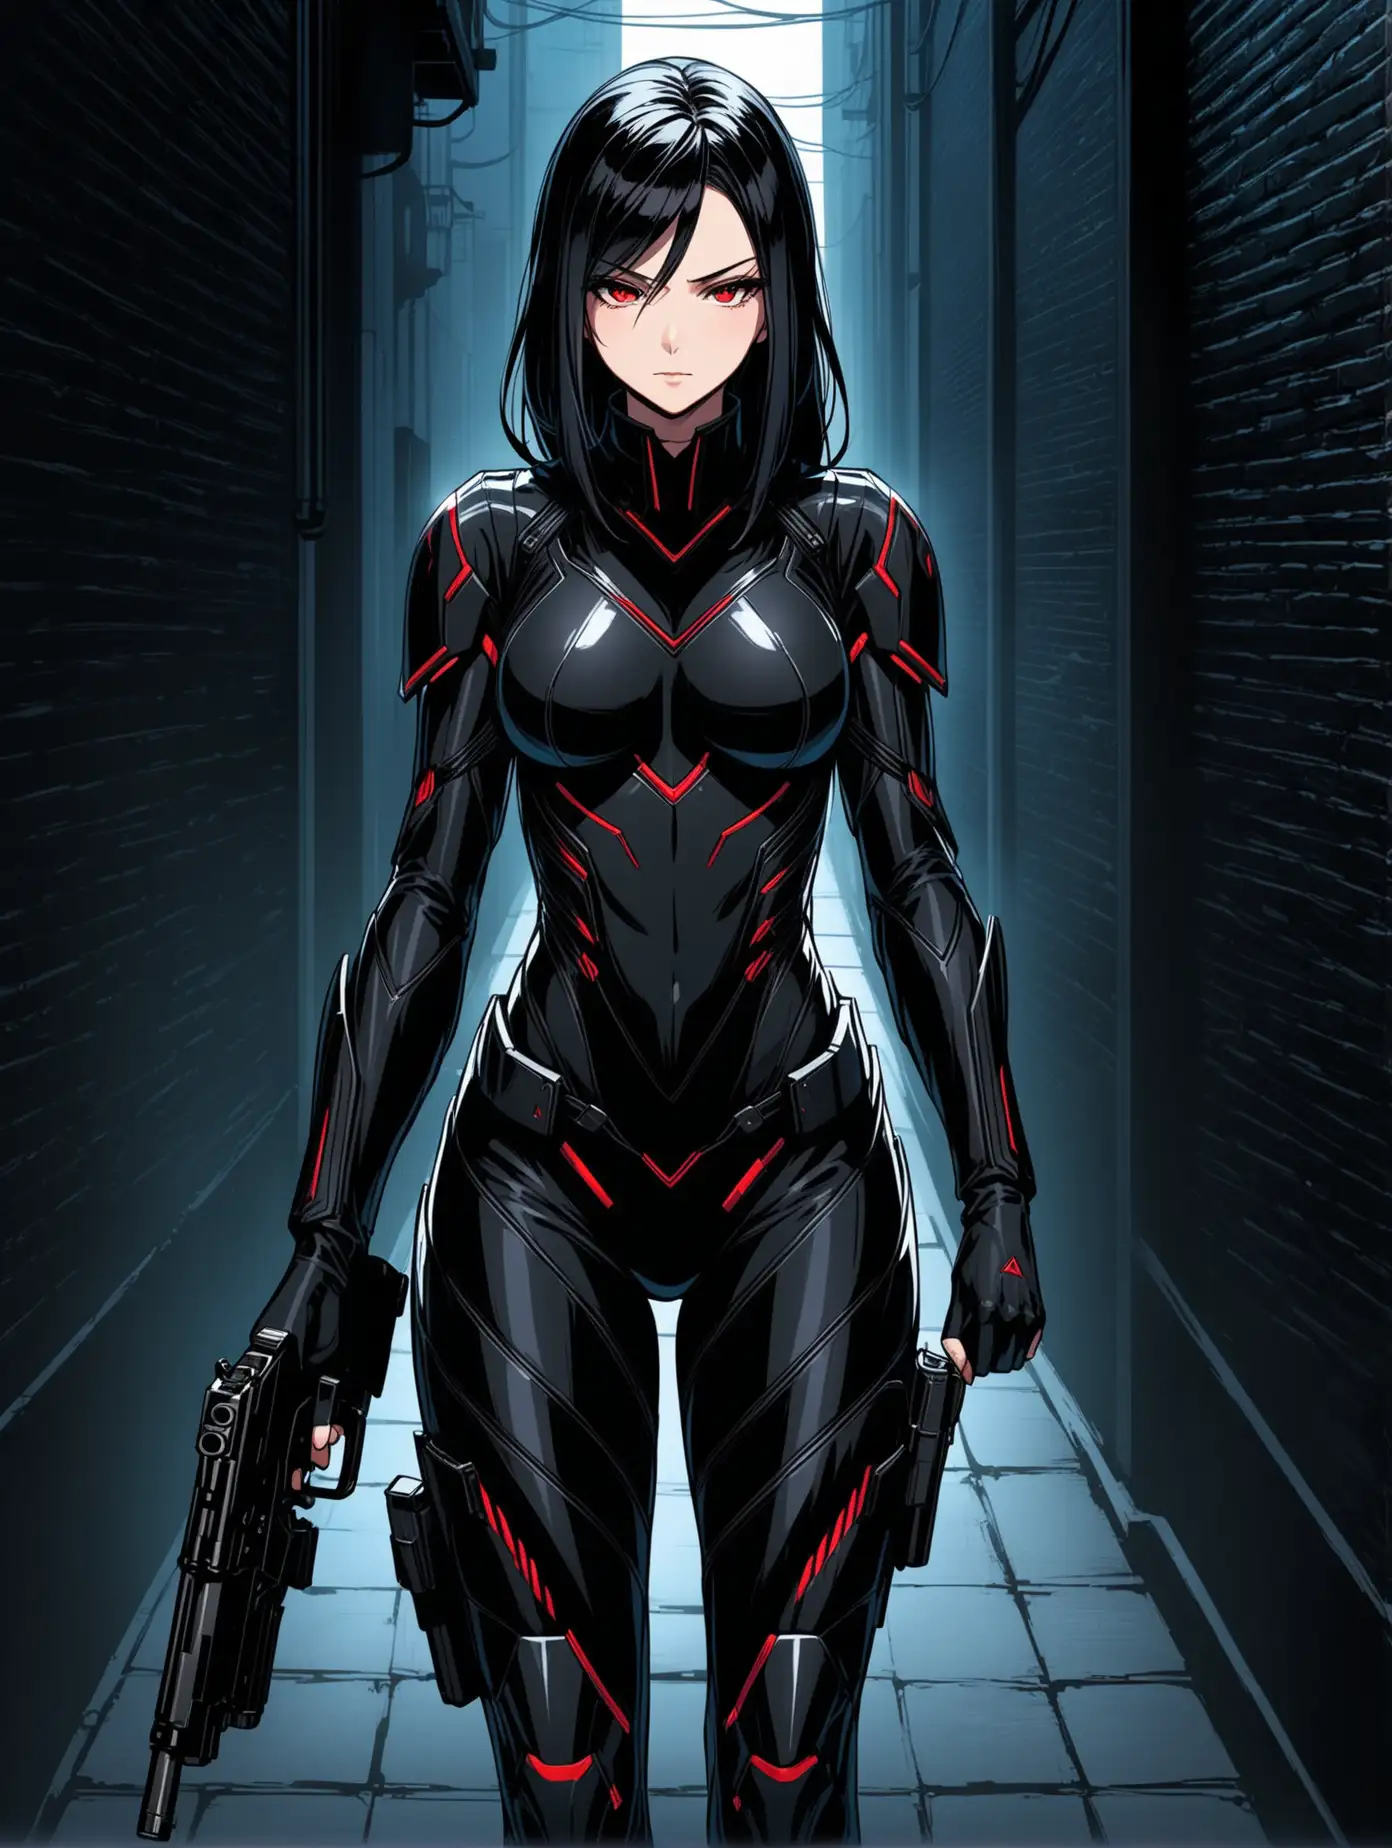 Sleek Anime Female Assassin in Black Stealth Suit with Dual Pistols